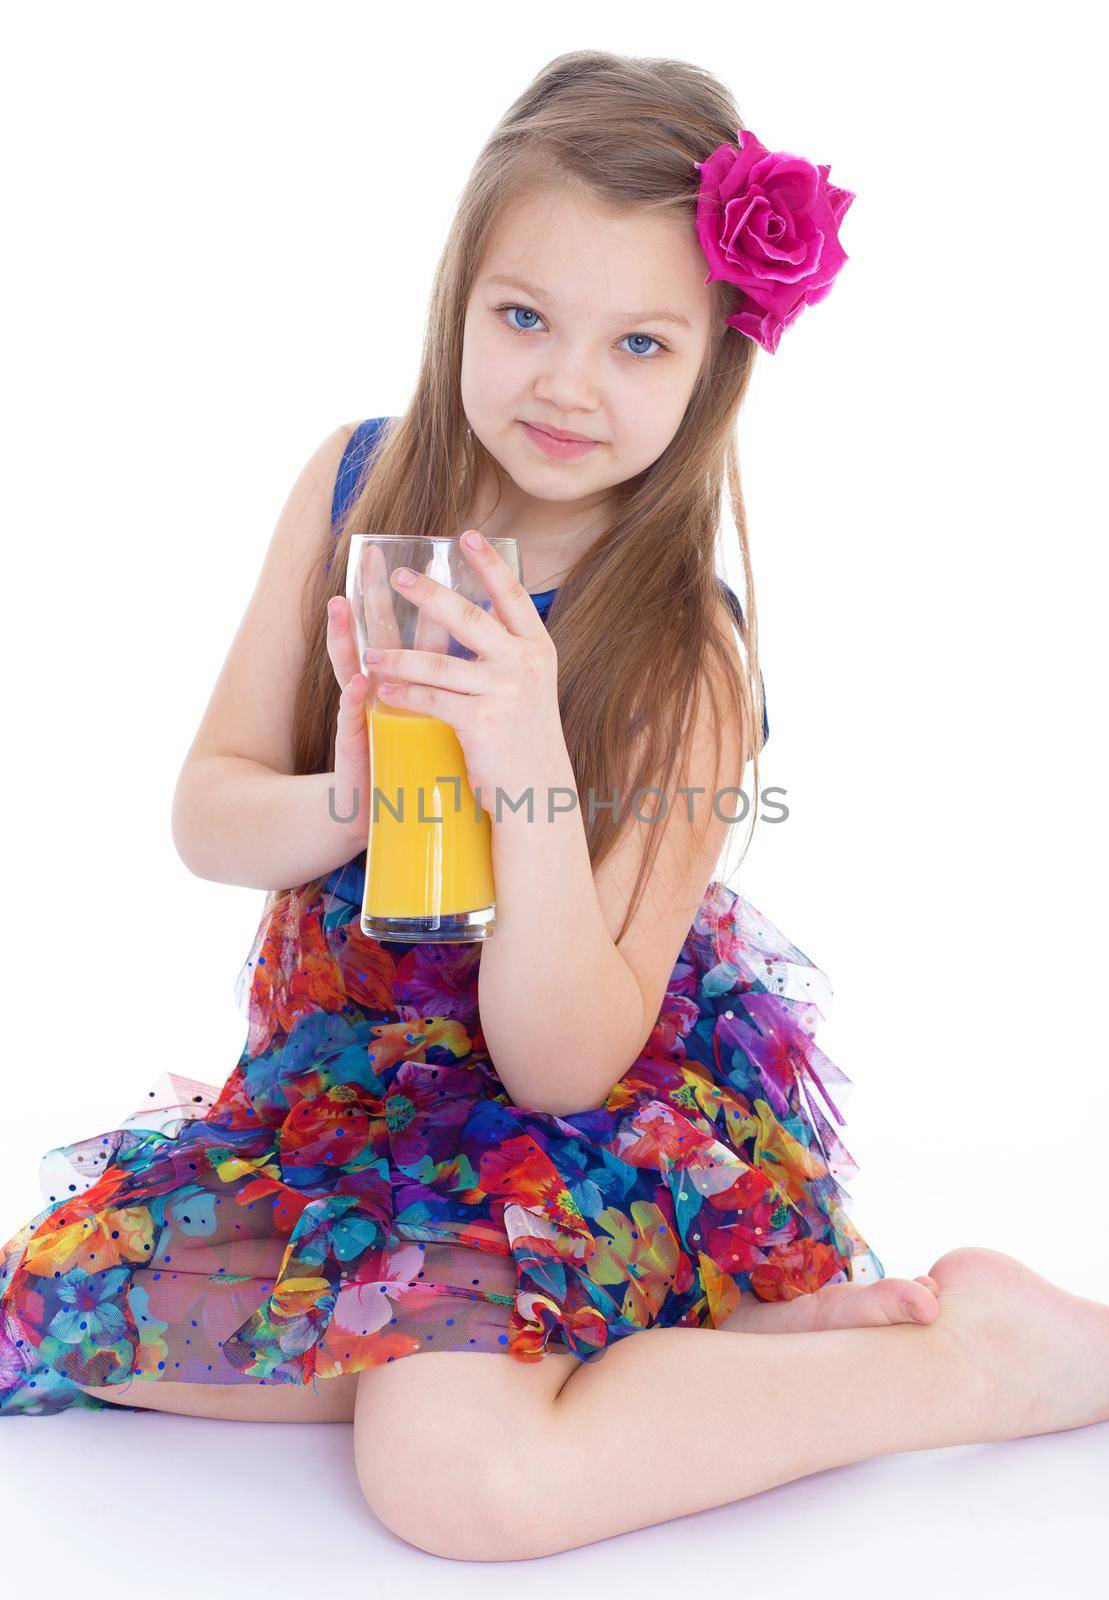 girl, fashion, rose in her hair and orange juice in a glass- Portrait of happy little girl drinking orange juice